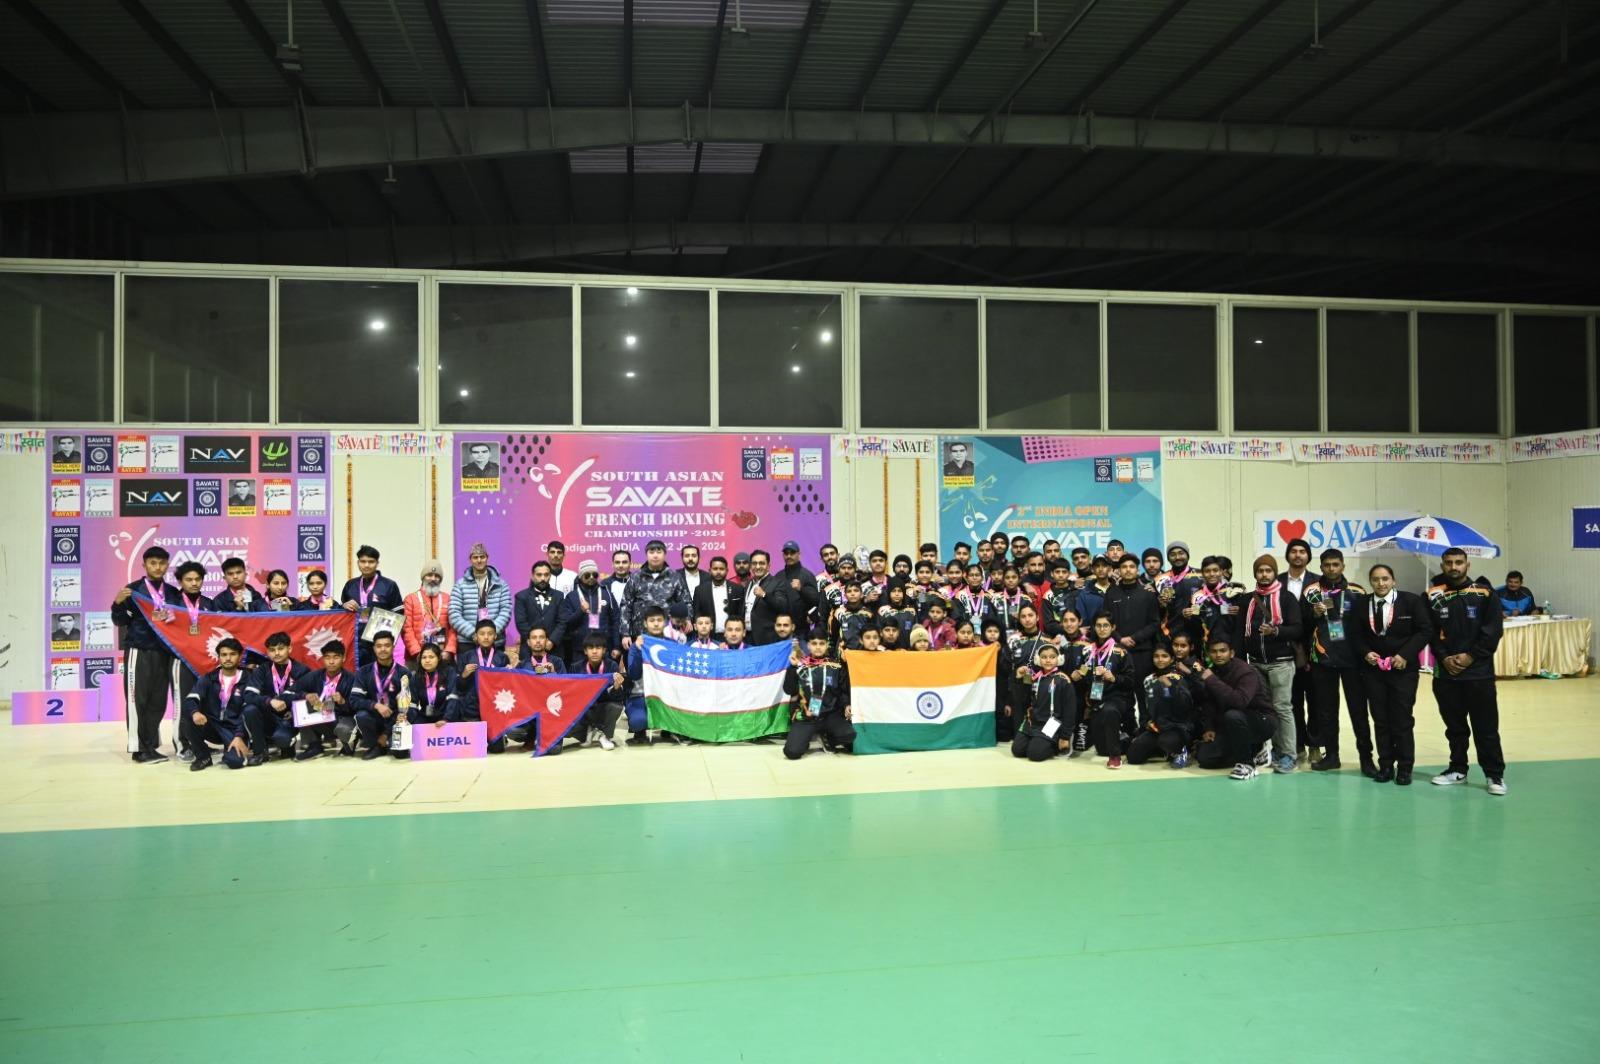 South Asian Savate championship, new step of Savate development in Asia